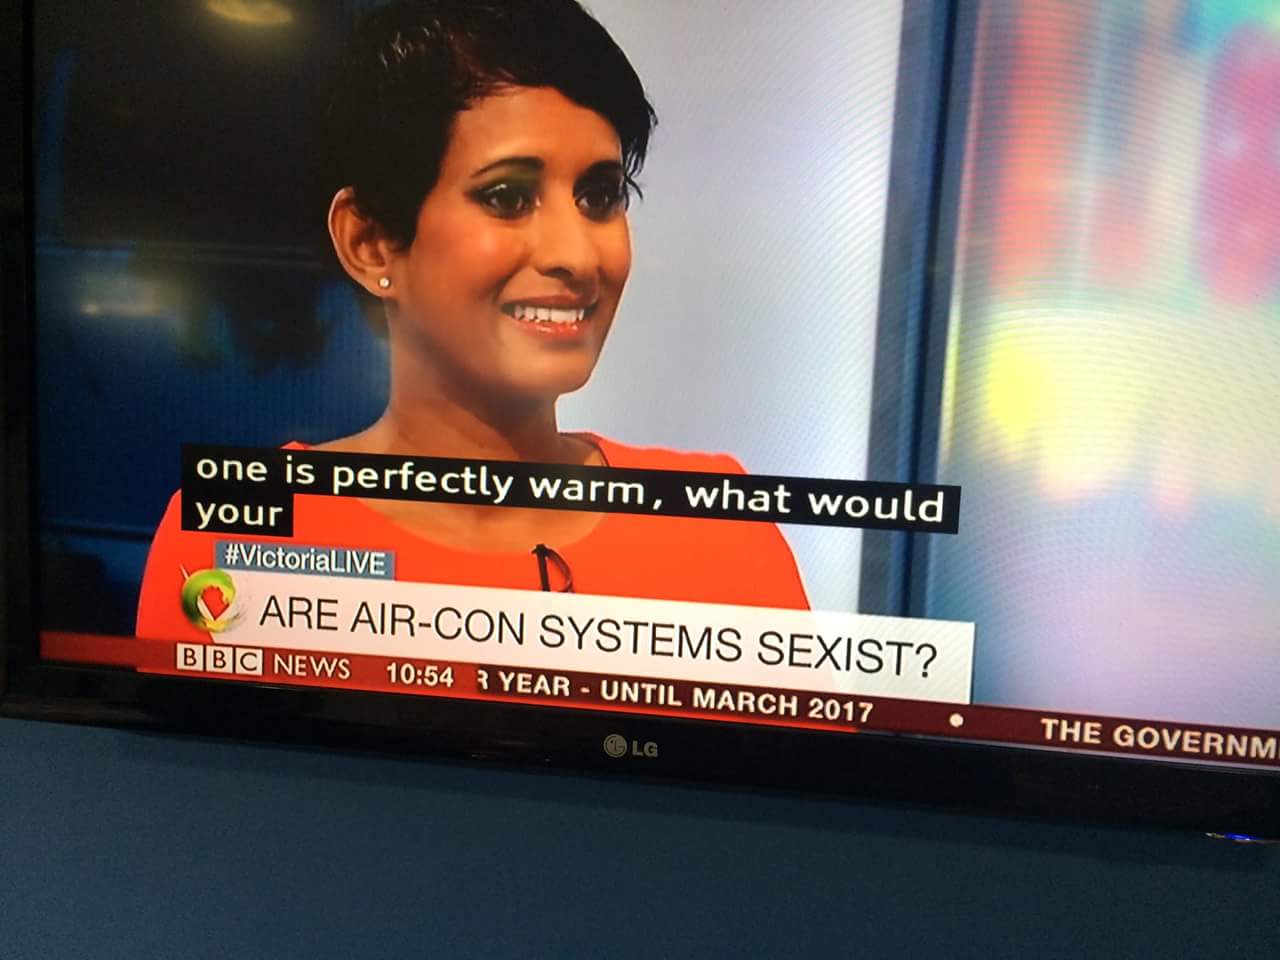 The BBC asking the hard hitting questions